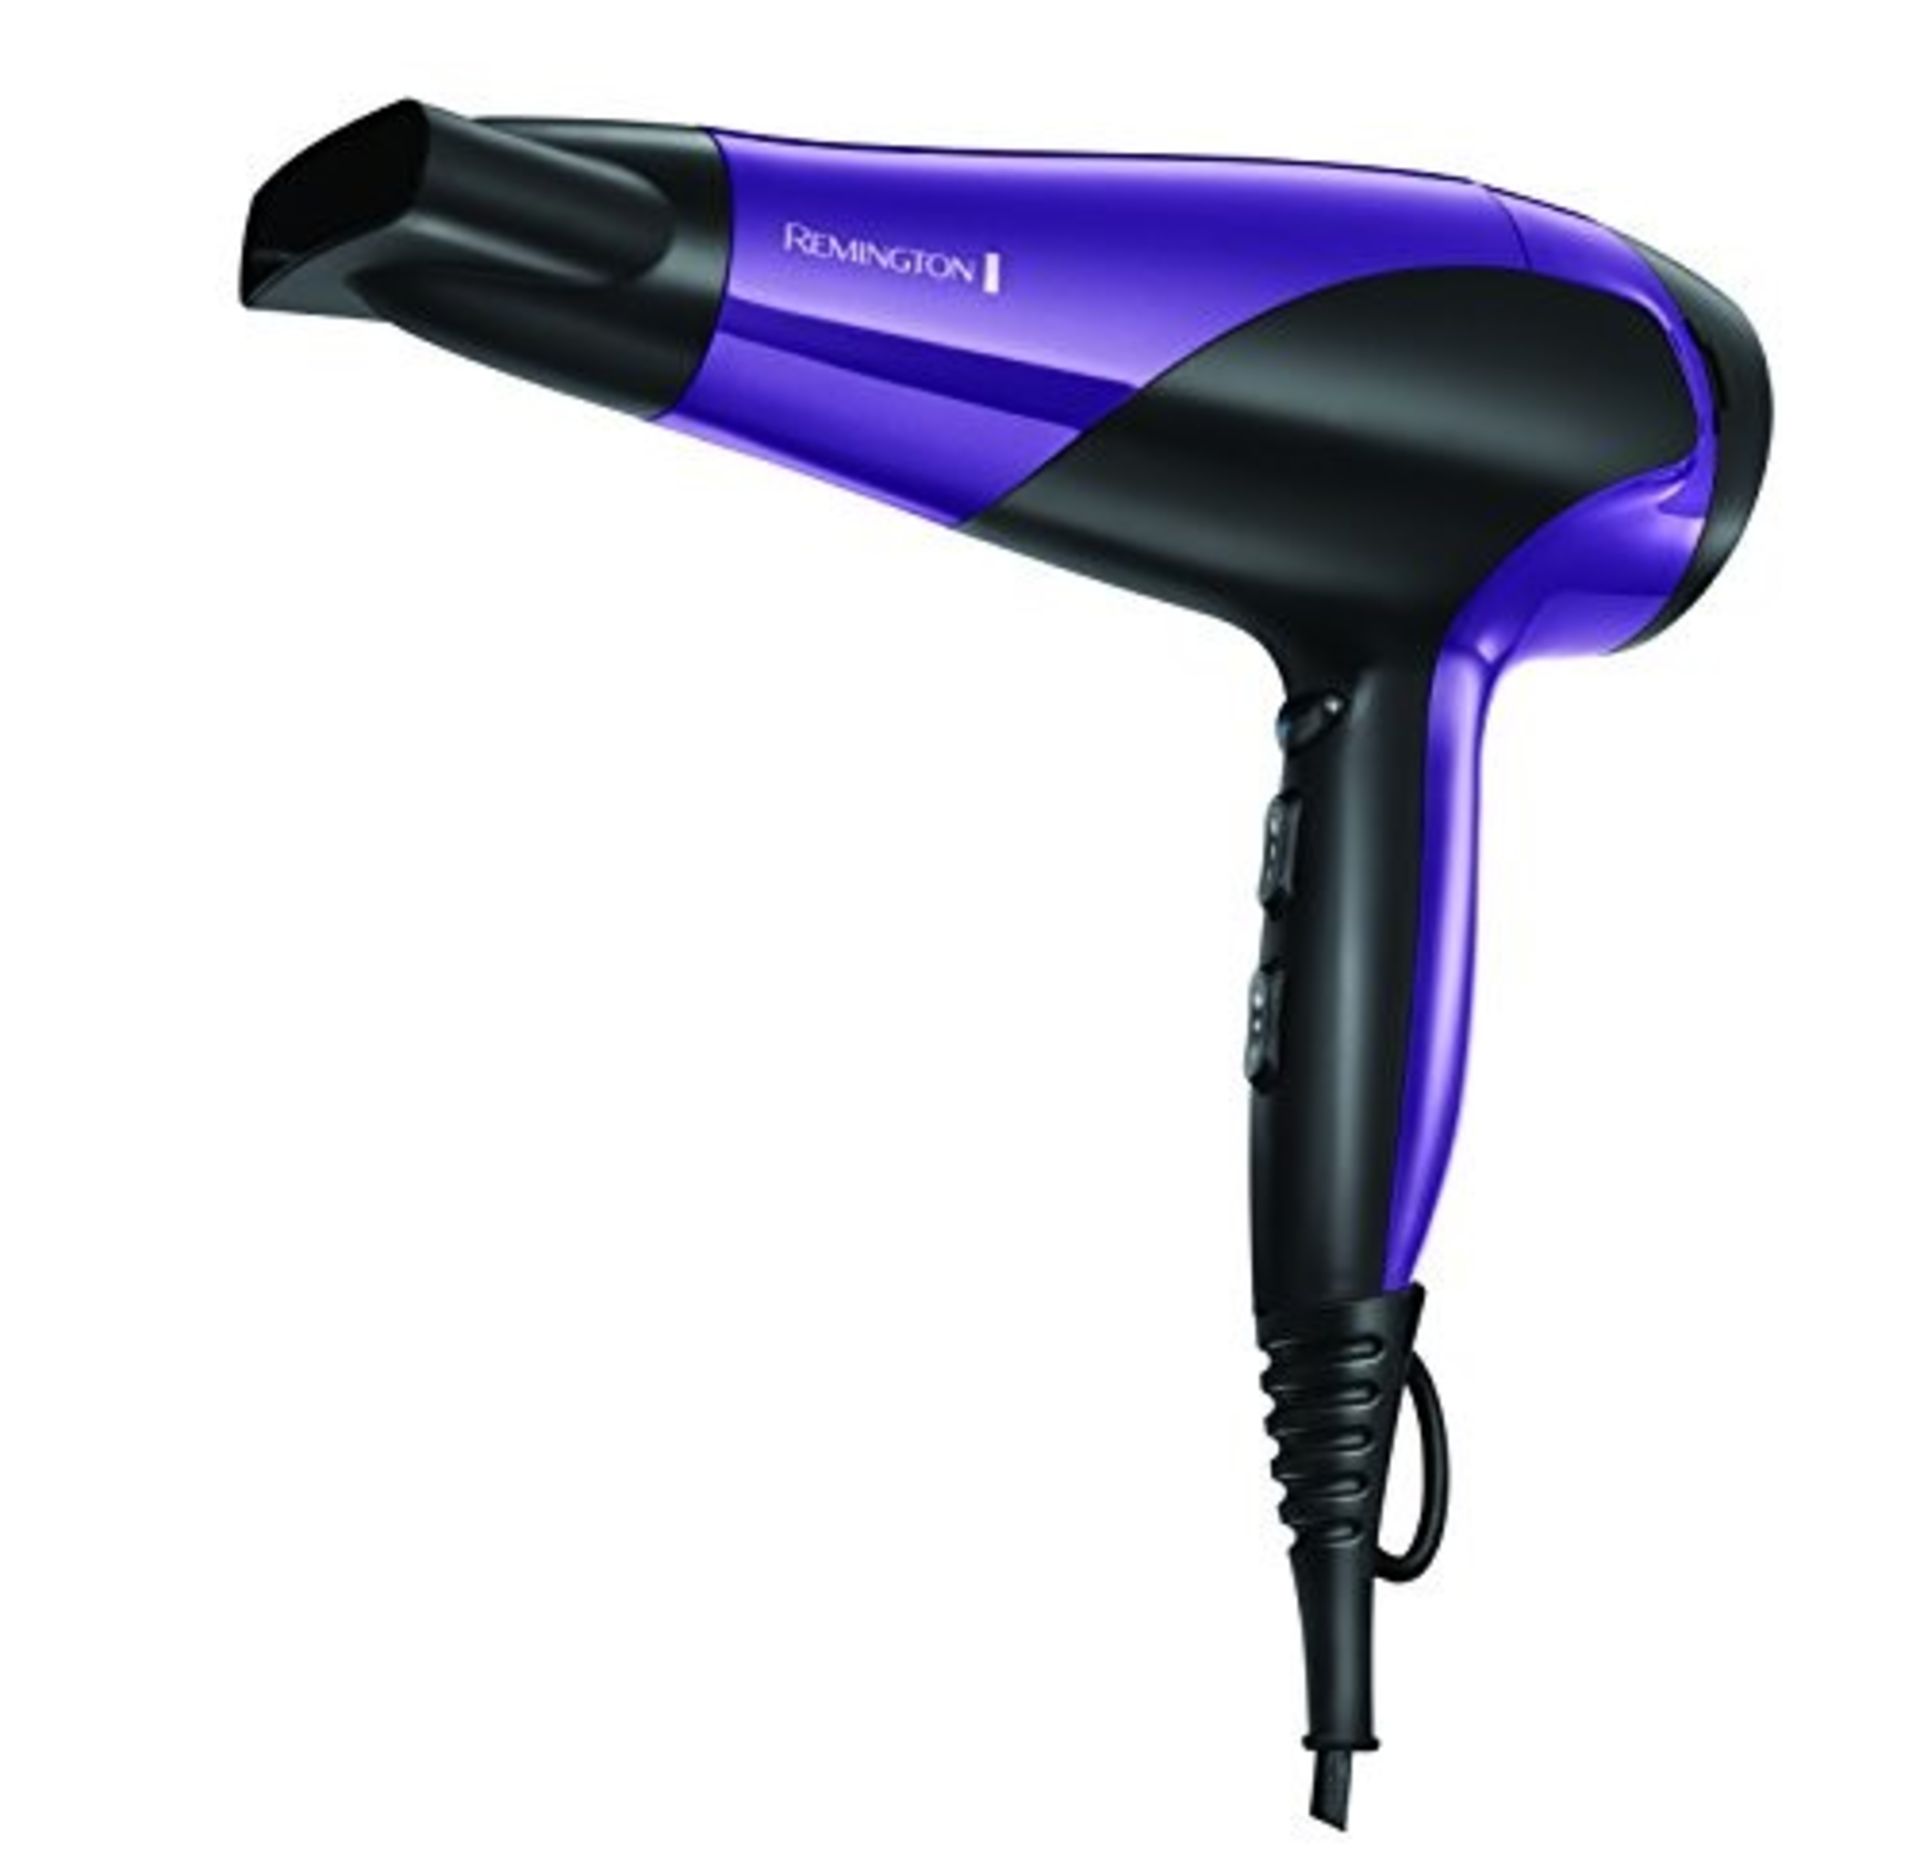 Remington D3190 Ionic Conditioning Hair Dryer fo